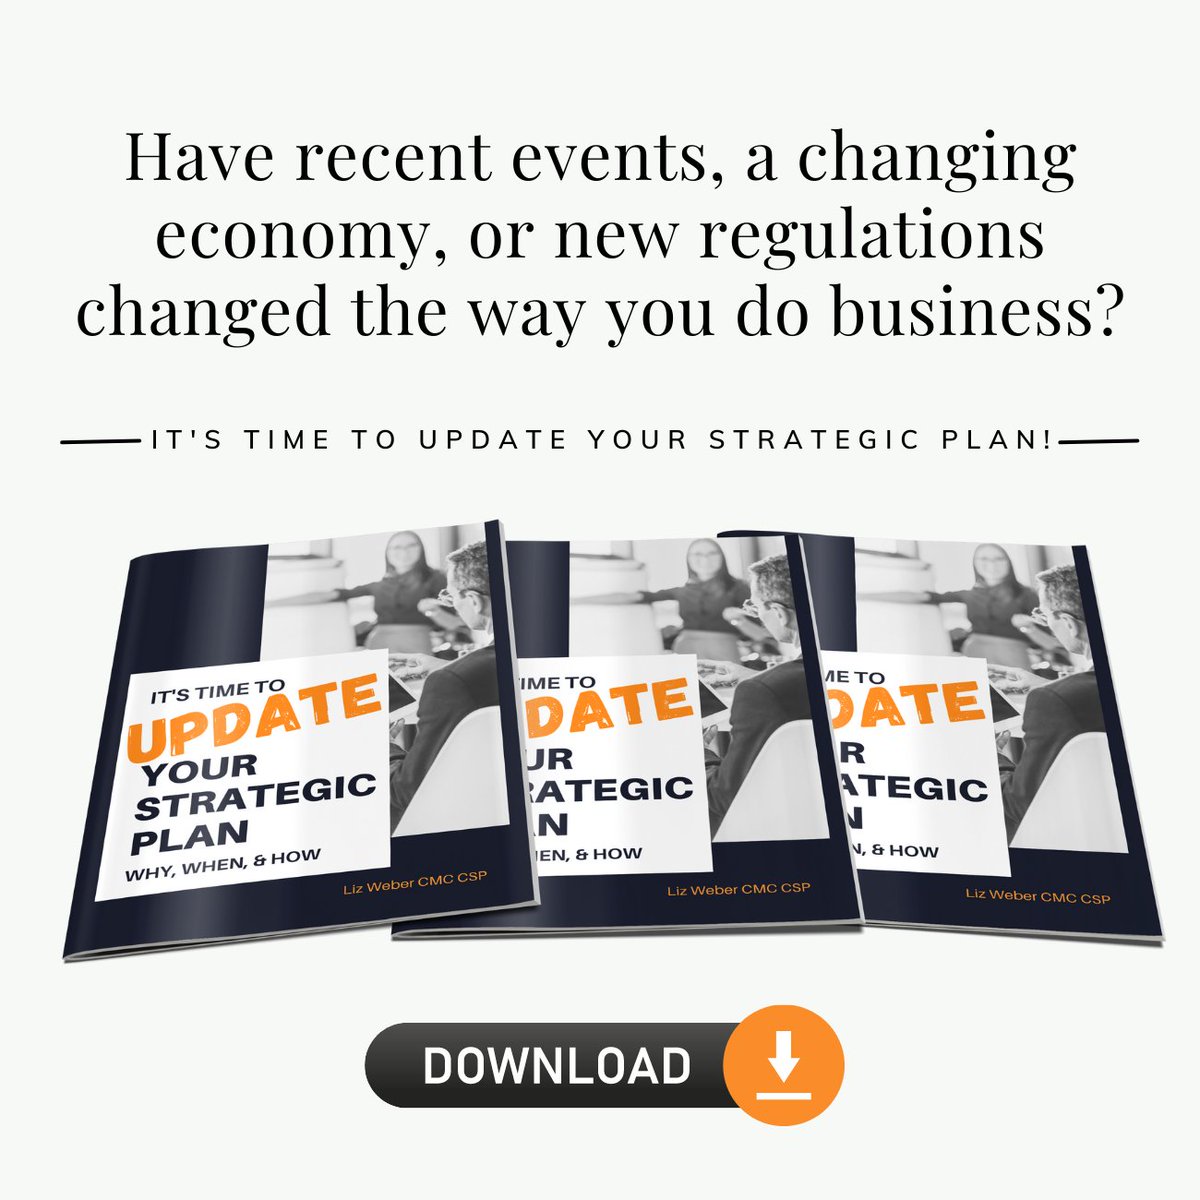 Is It Time to Update Your Strategic Plan?
DOWNLOAD this FREE PDF & find out!!
bit.ly/3cwpbVN

#ExecutivesandManagement #NonprofitLeadership #CEO #StrategicLeadership